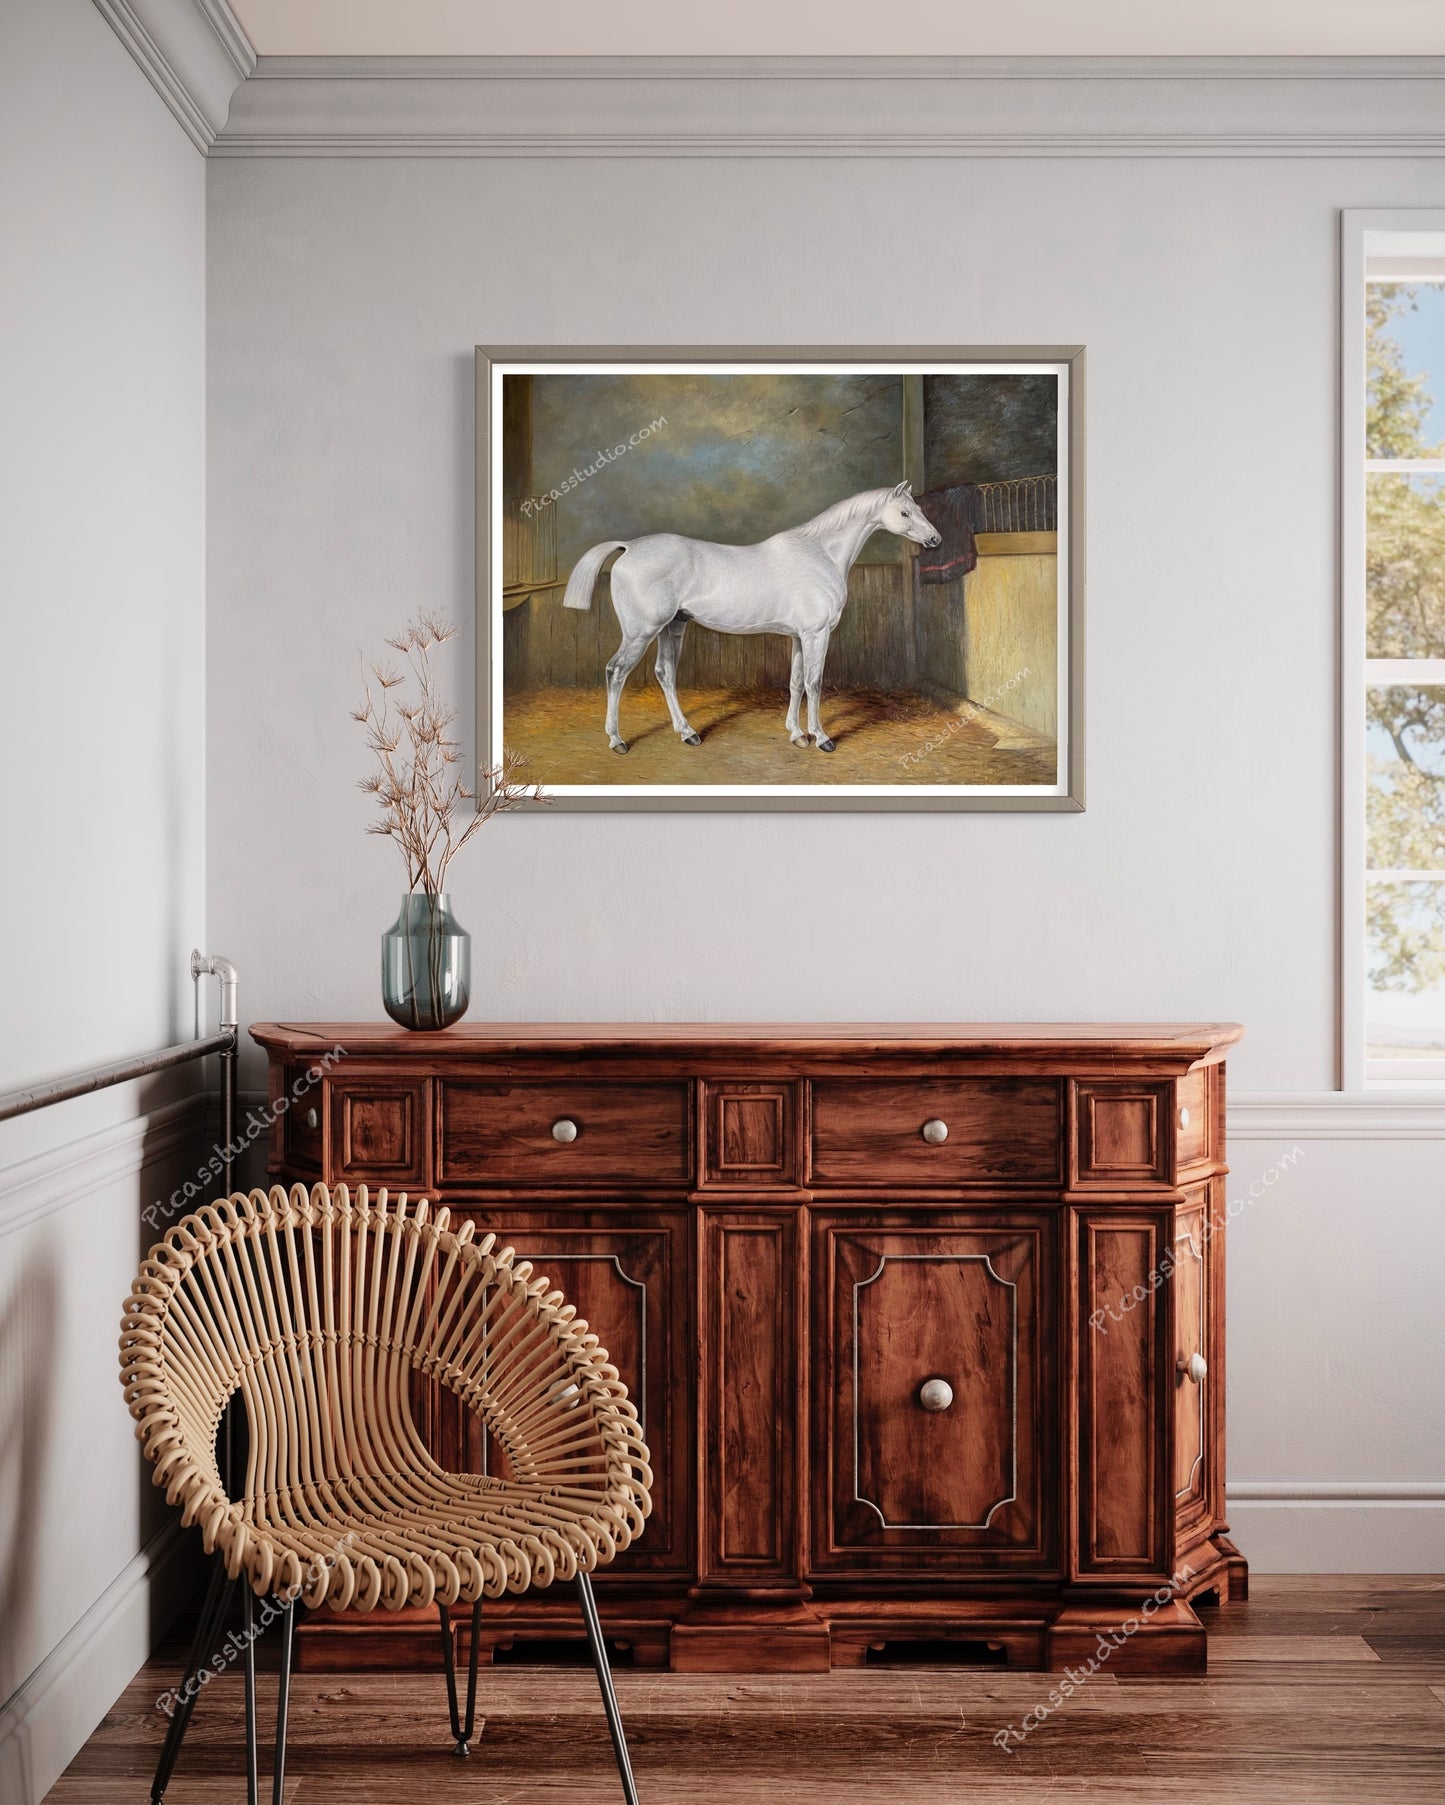 A Favourite Grey Horse Belonging To George Reed Standing In A Loose Box by William BarraudItem Oil Painting Hand Painted Art on Canvas Vintage Wall Decor Unframed